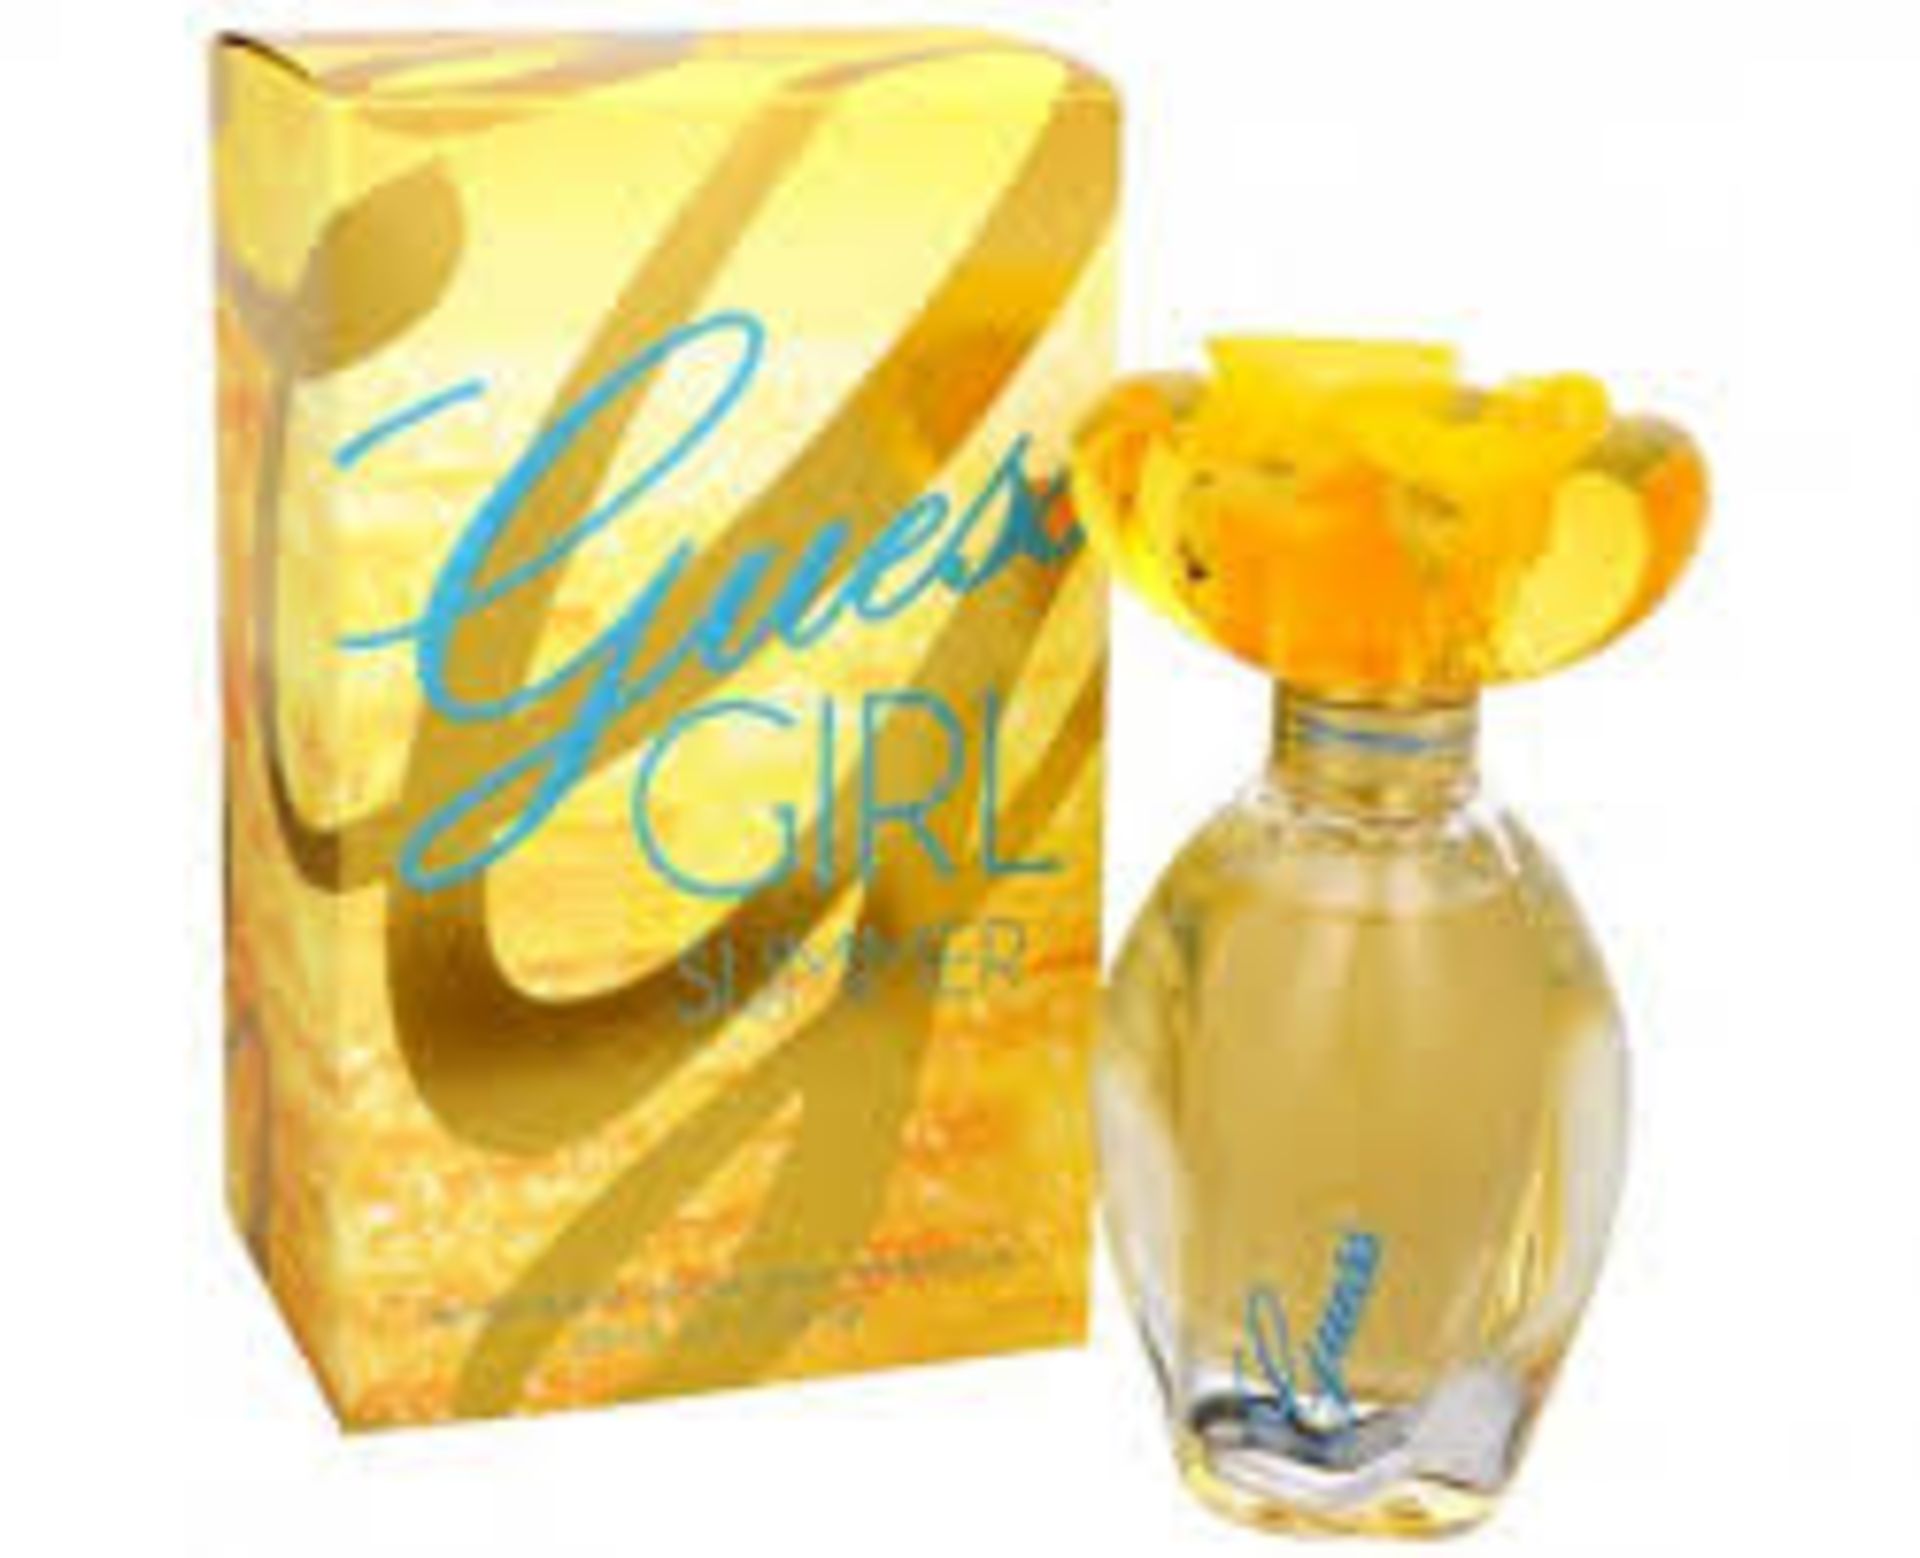 V *TRADE QTY* Brand New Guess Girl Summer Eau De Toilette Natural Spray X 3 YOUR BID PRICE TO BE